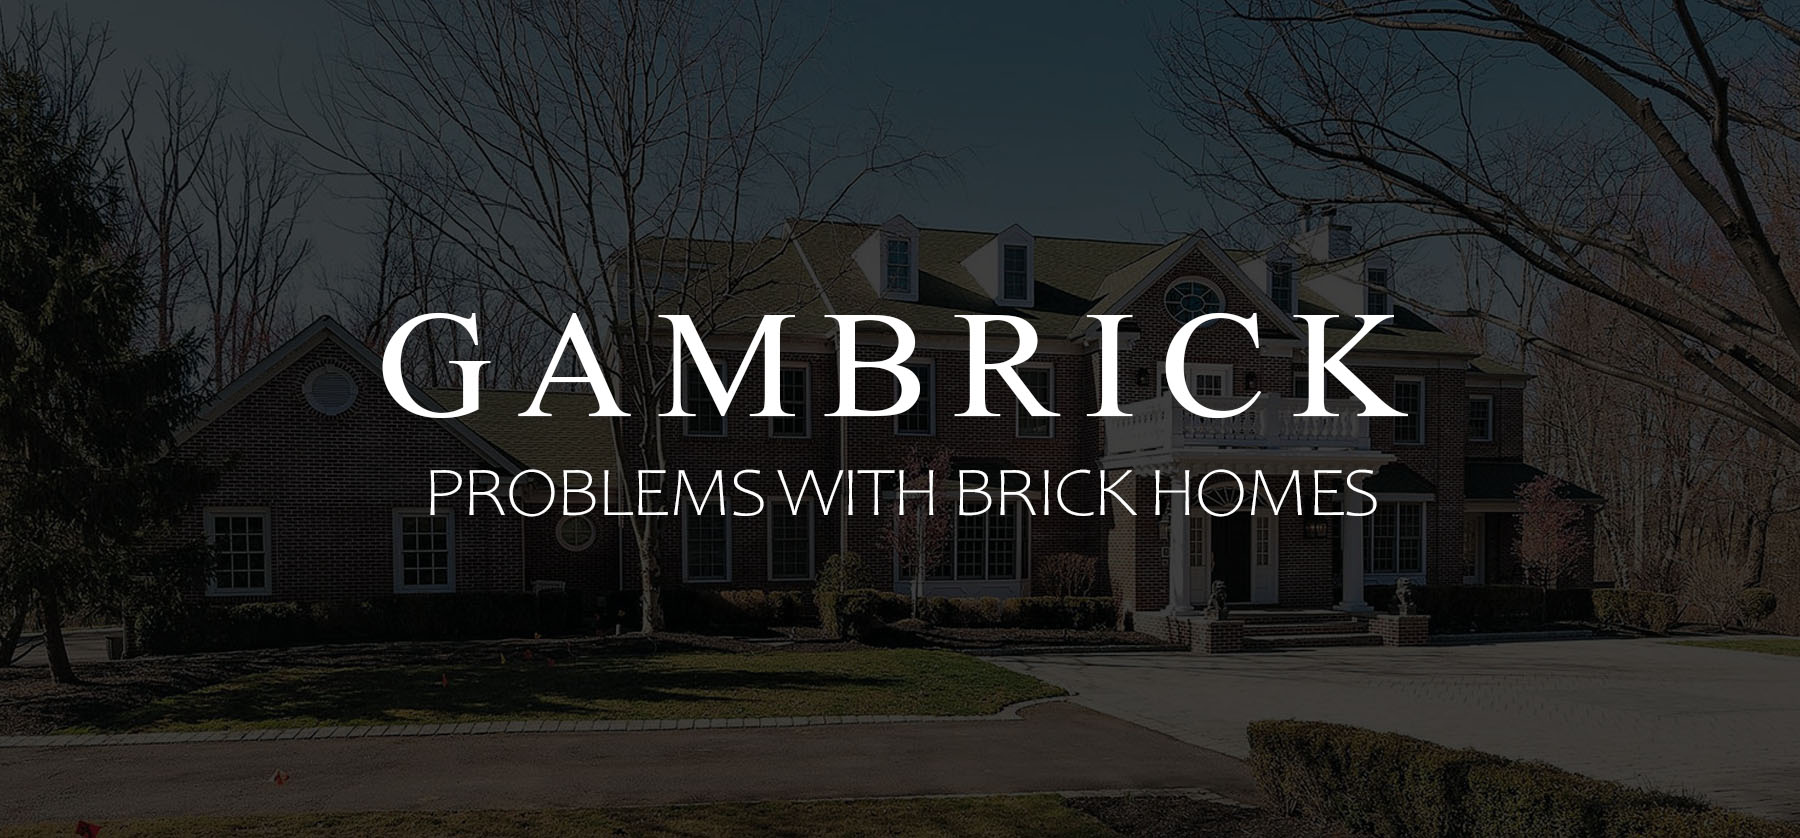 Problems with brick homes banner 1